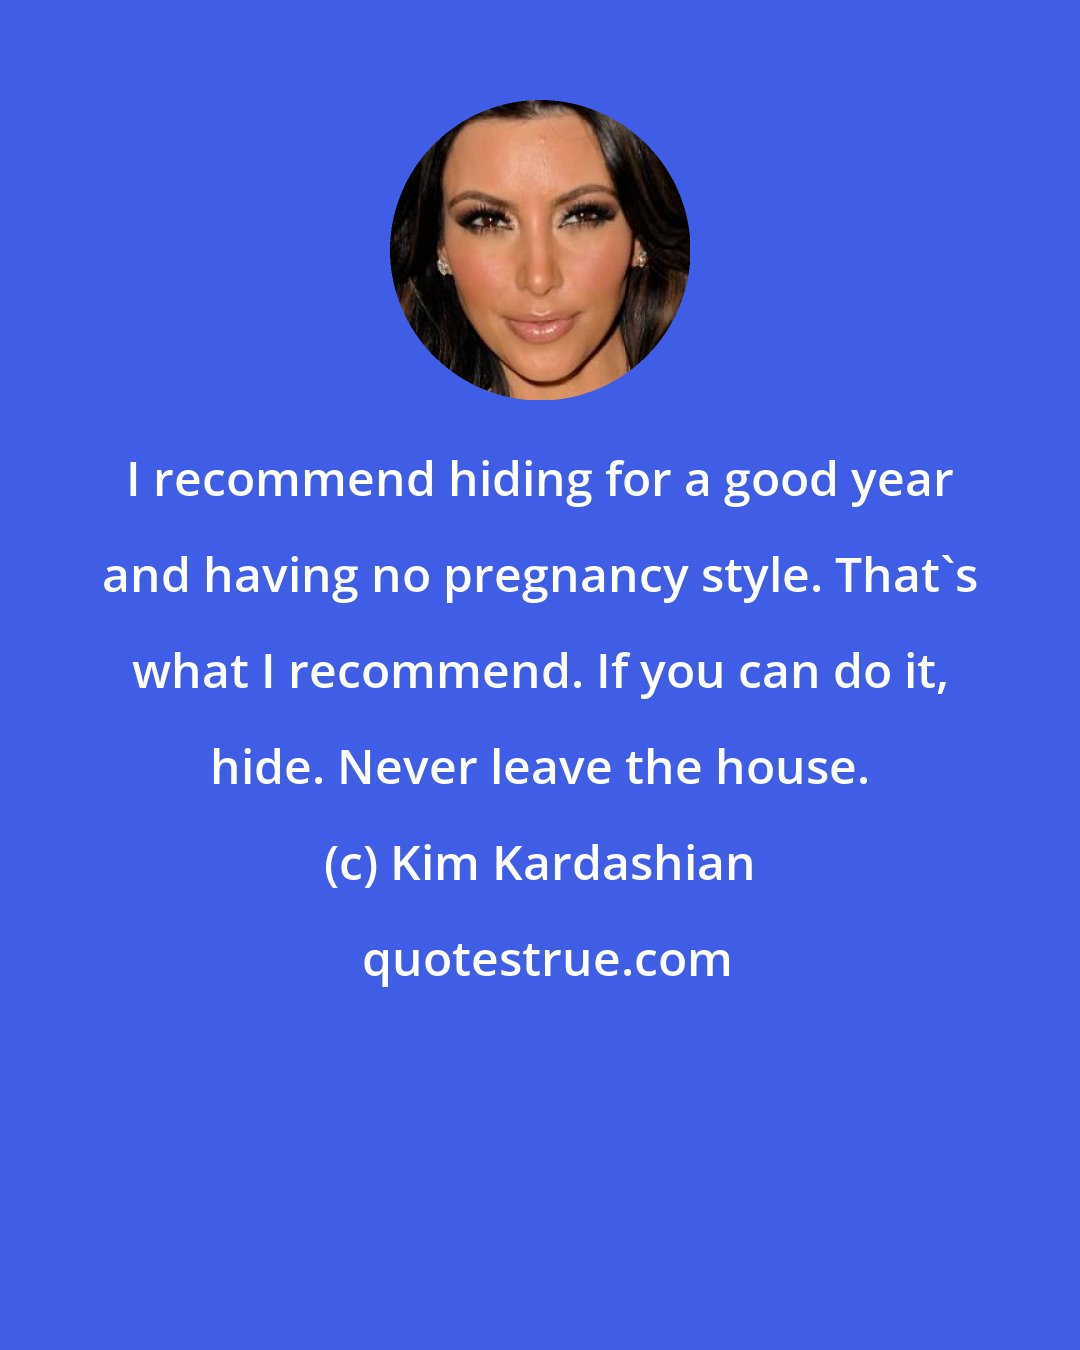 Kim Kardashian: I recommend hiding for a good year and having no pregnancy style. That's what I recommend. If you can do it, hide. Never leave the house.